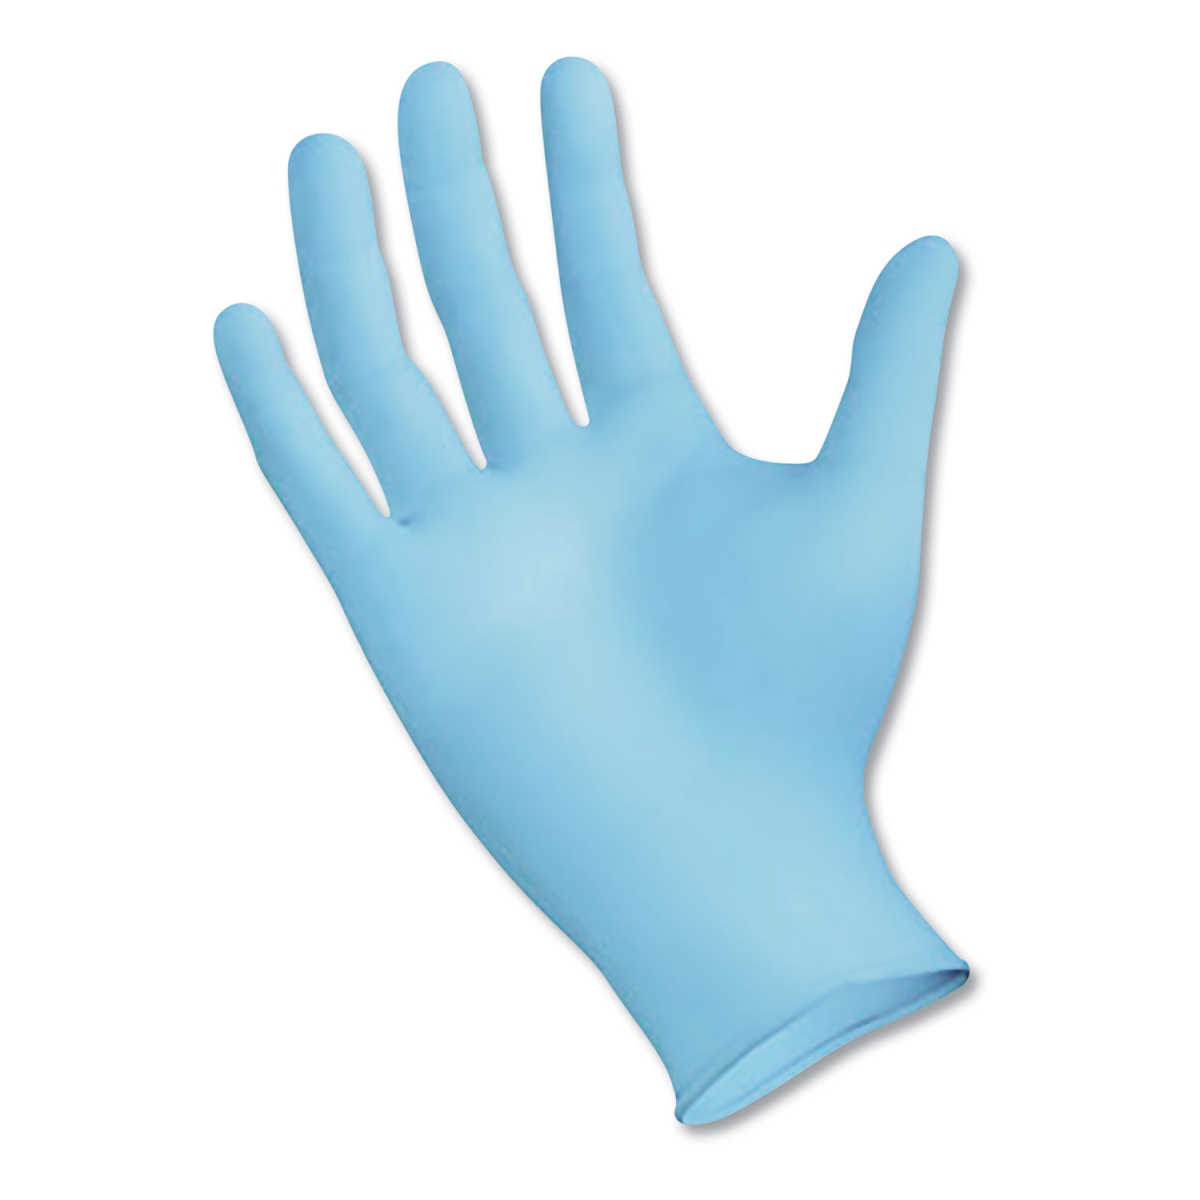 Disposable Examination Nitrile Gloves, X-Large, Blue, 5 mil, 100/Box